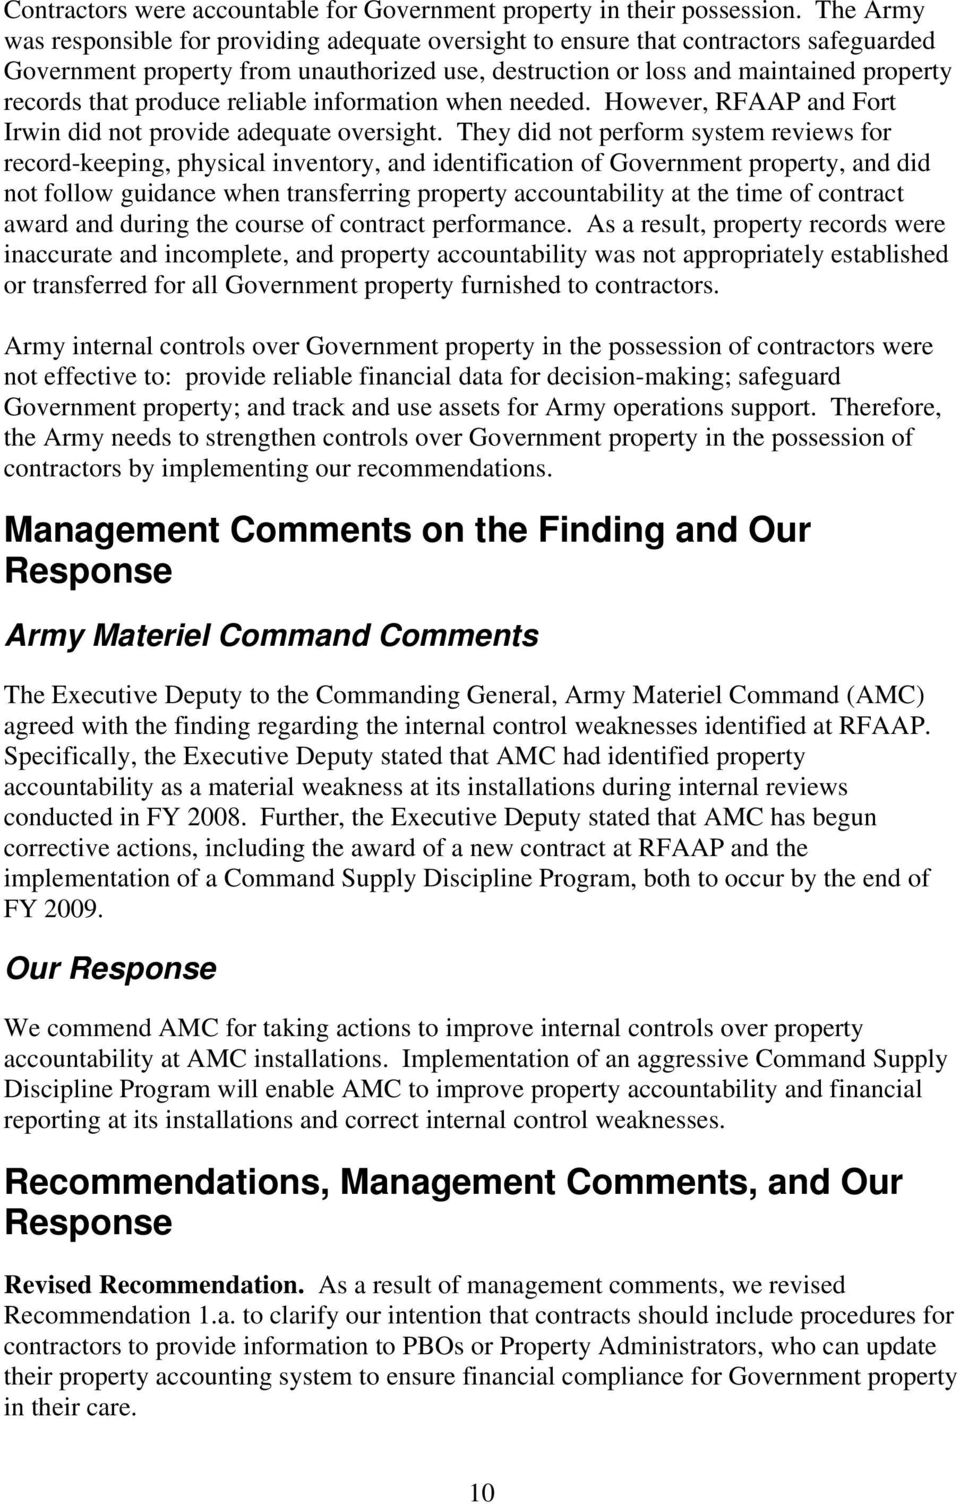 produce reliable information when needed. However, RFAAP and Fort Irwin did not provide adequate oversight.